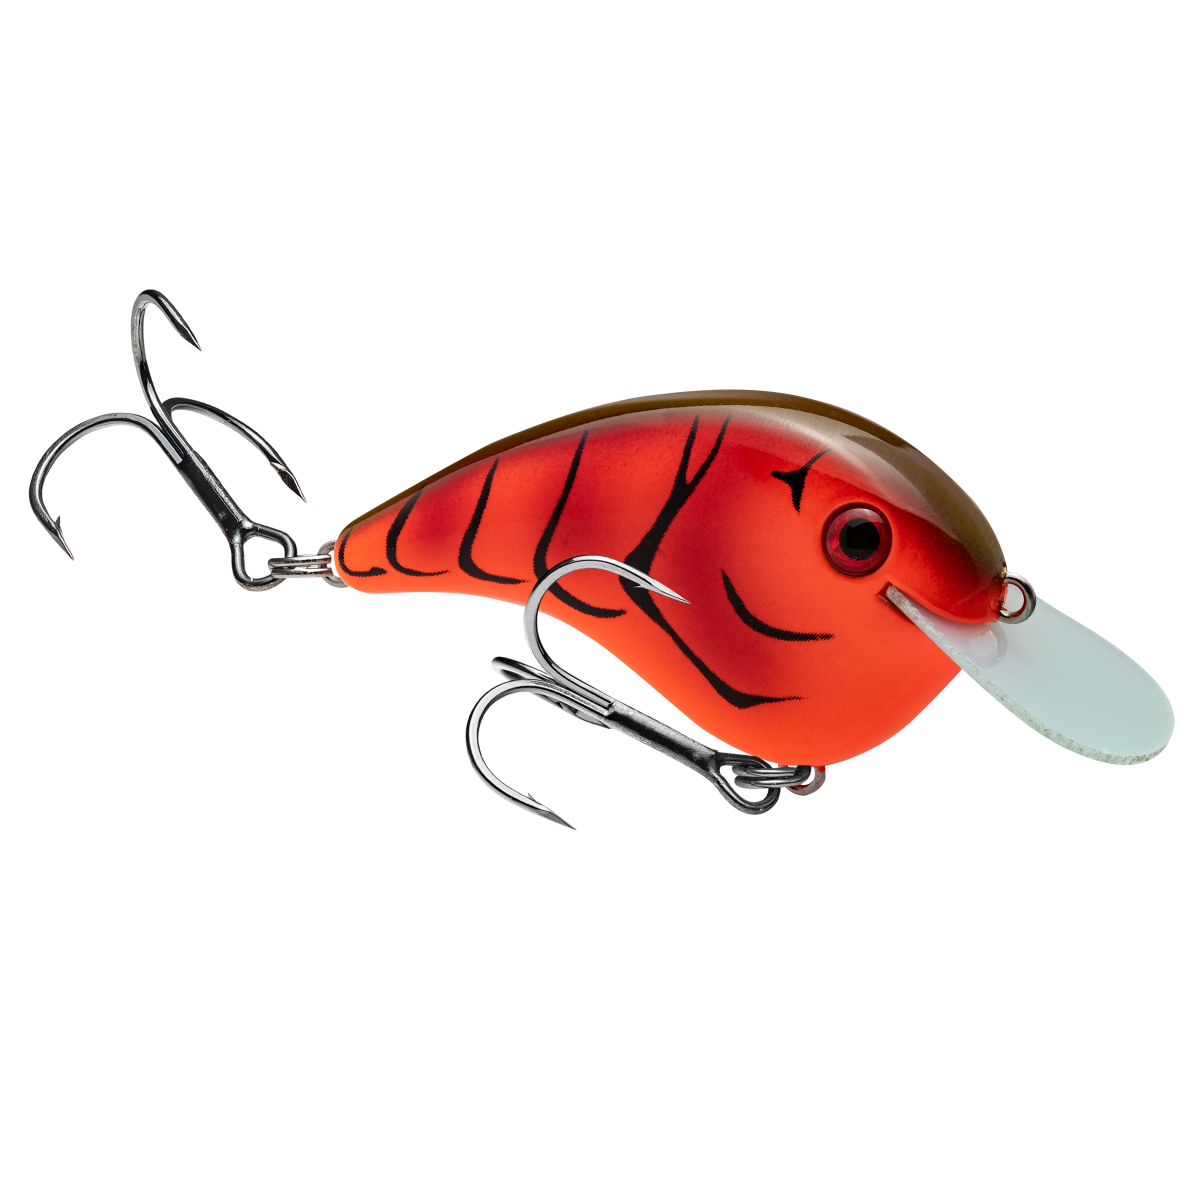 Search results for: 'panfish magnet hooks